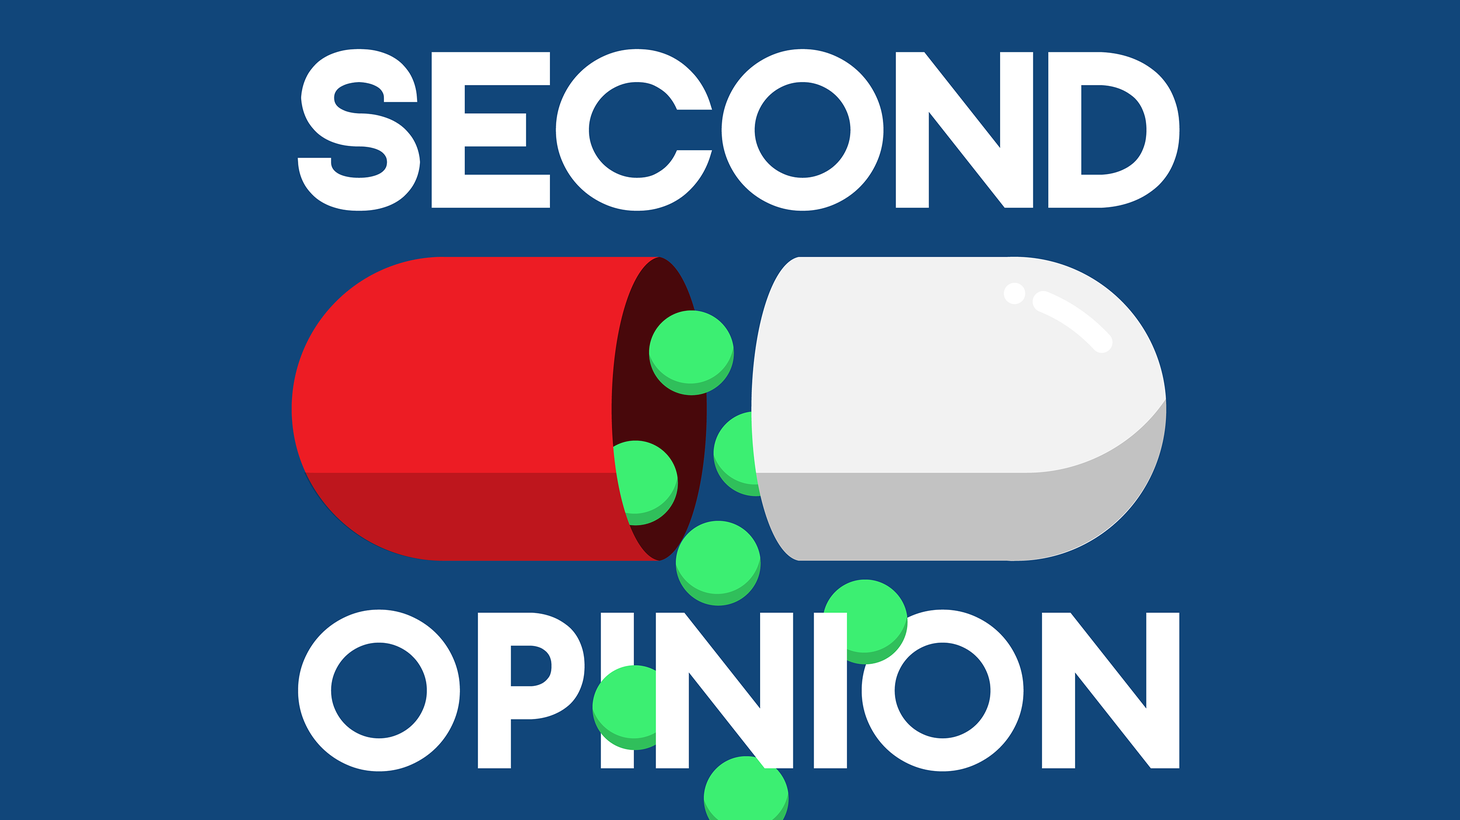 Times have changed and new data suggests that daily aspirin isn’t as helpful as once thought.